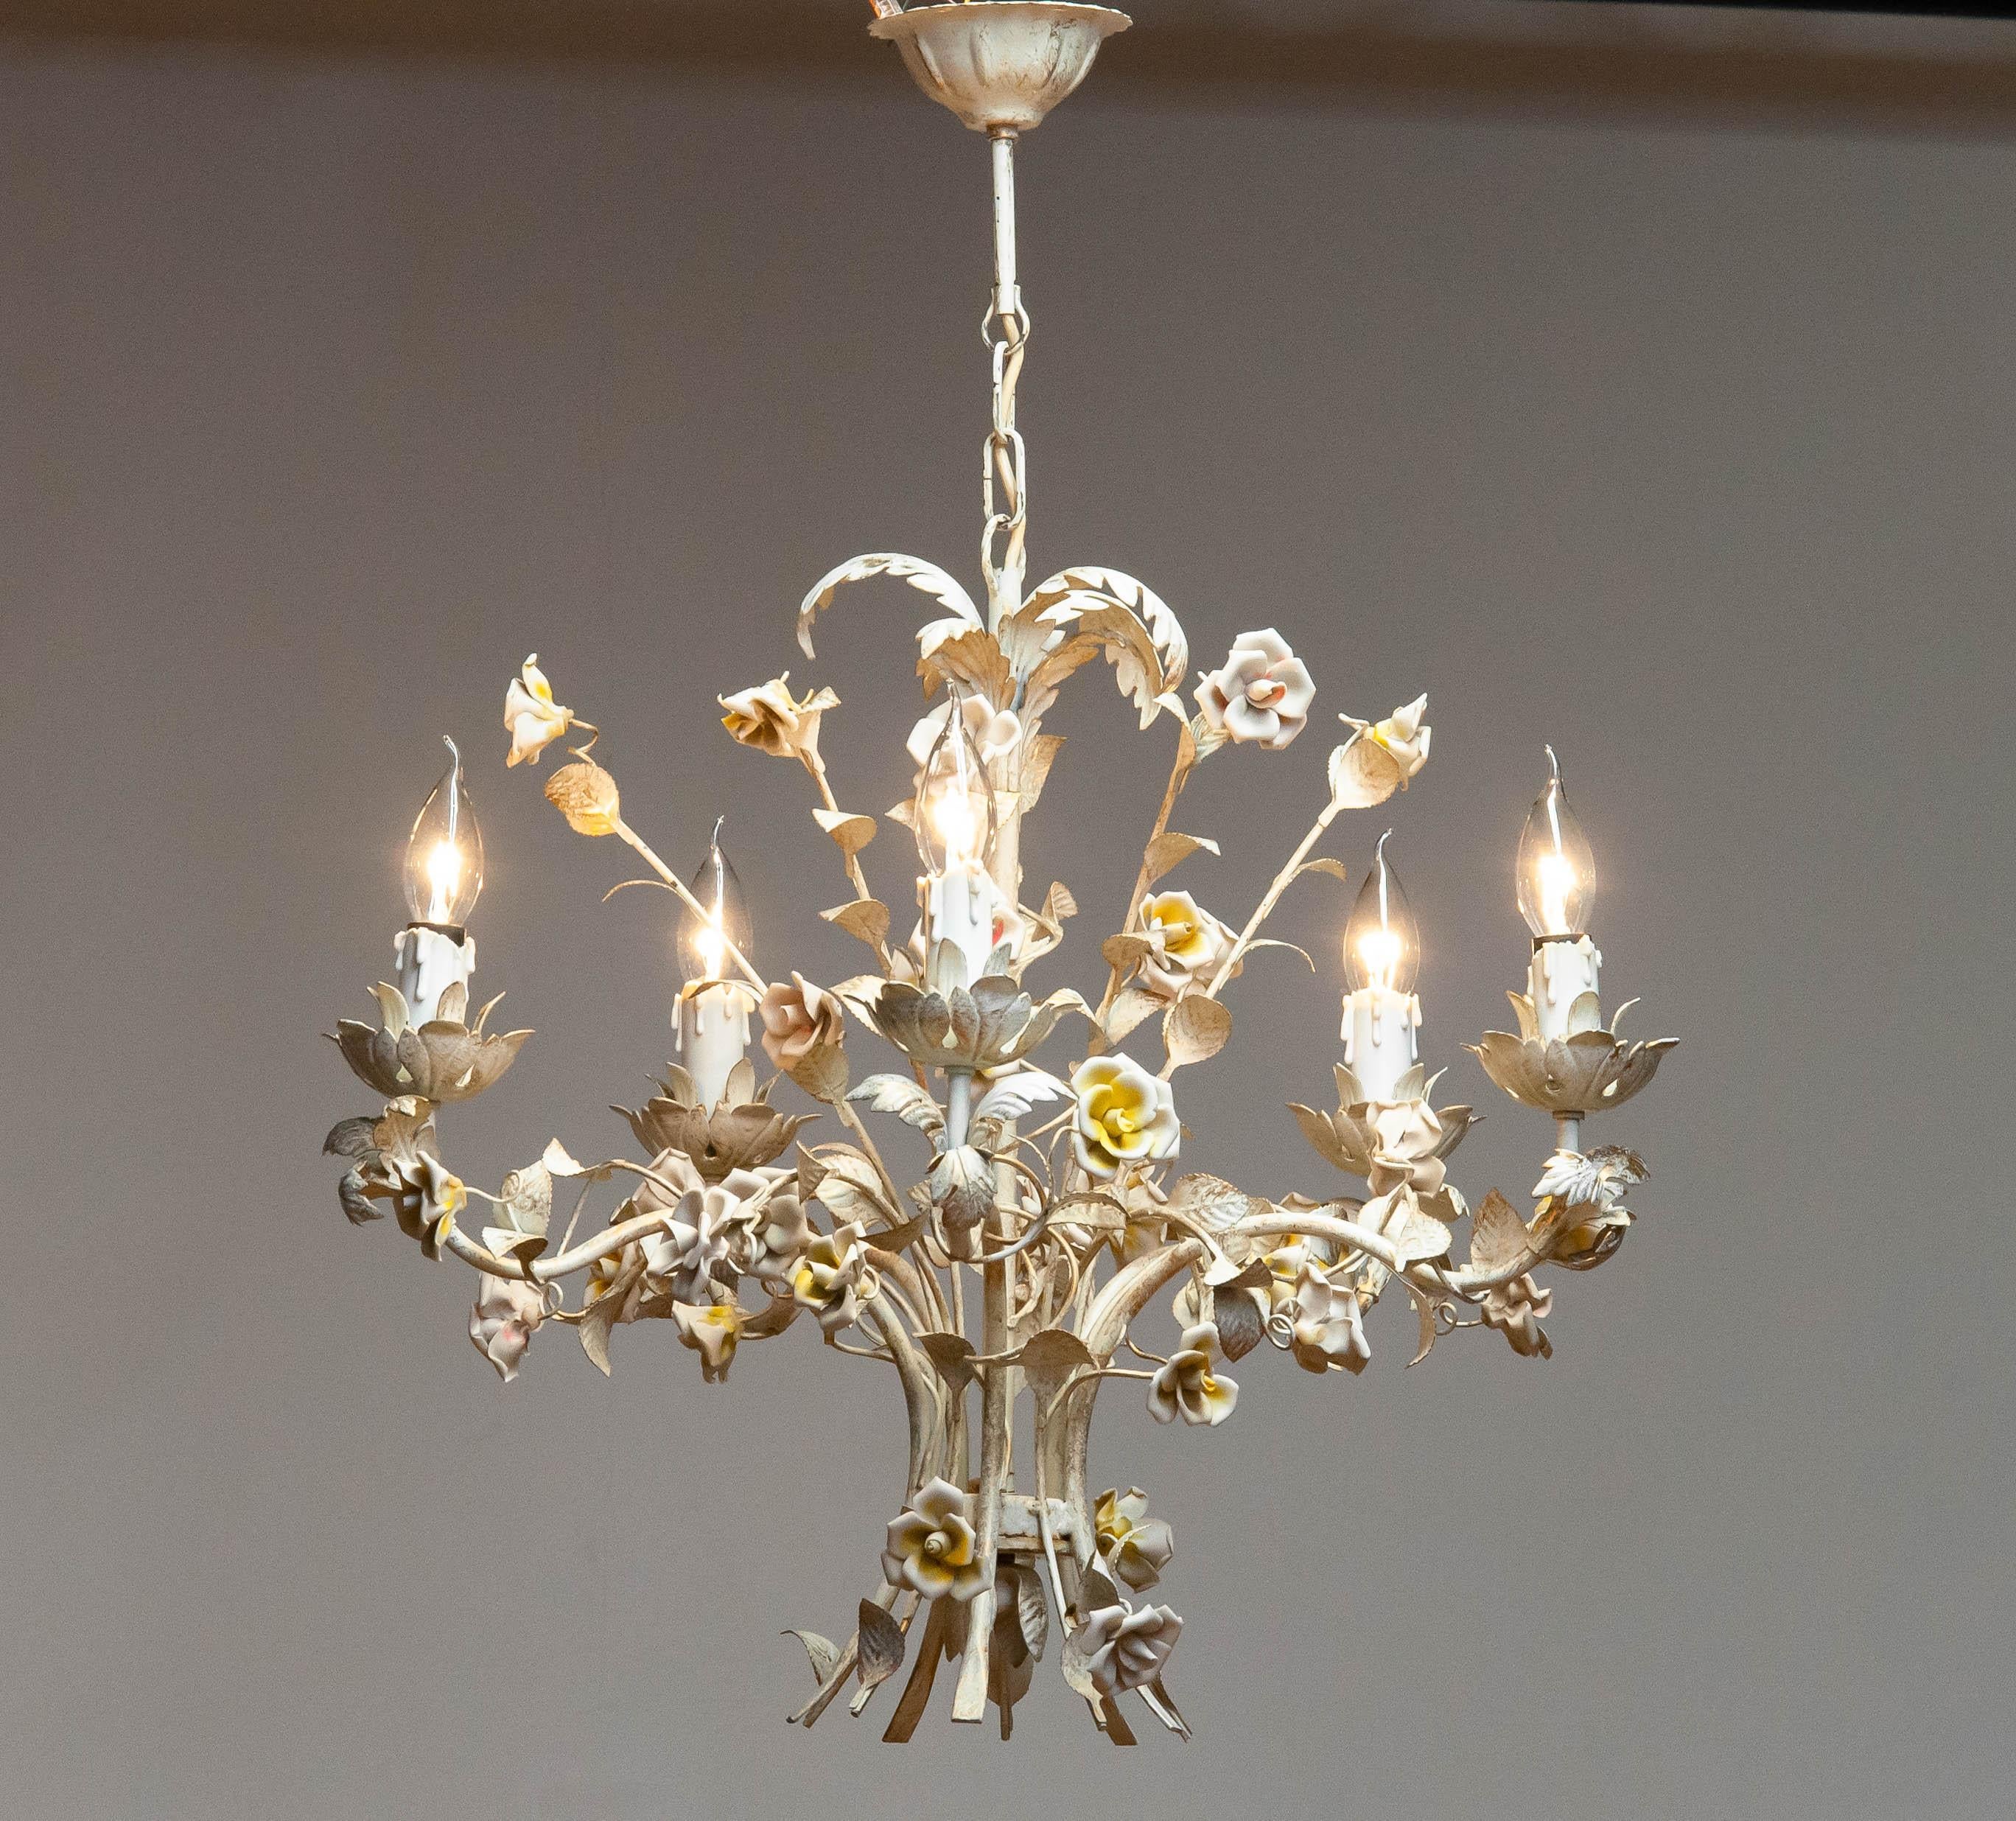 Absolutely beautiful hand painted, pastel colors with golden details, chandelier made in the 1960s in Italy. Soft pastel colors ar used to give this chandelier her chic appearance and character.
The flowers on the chandelier are made of